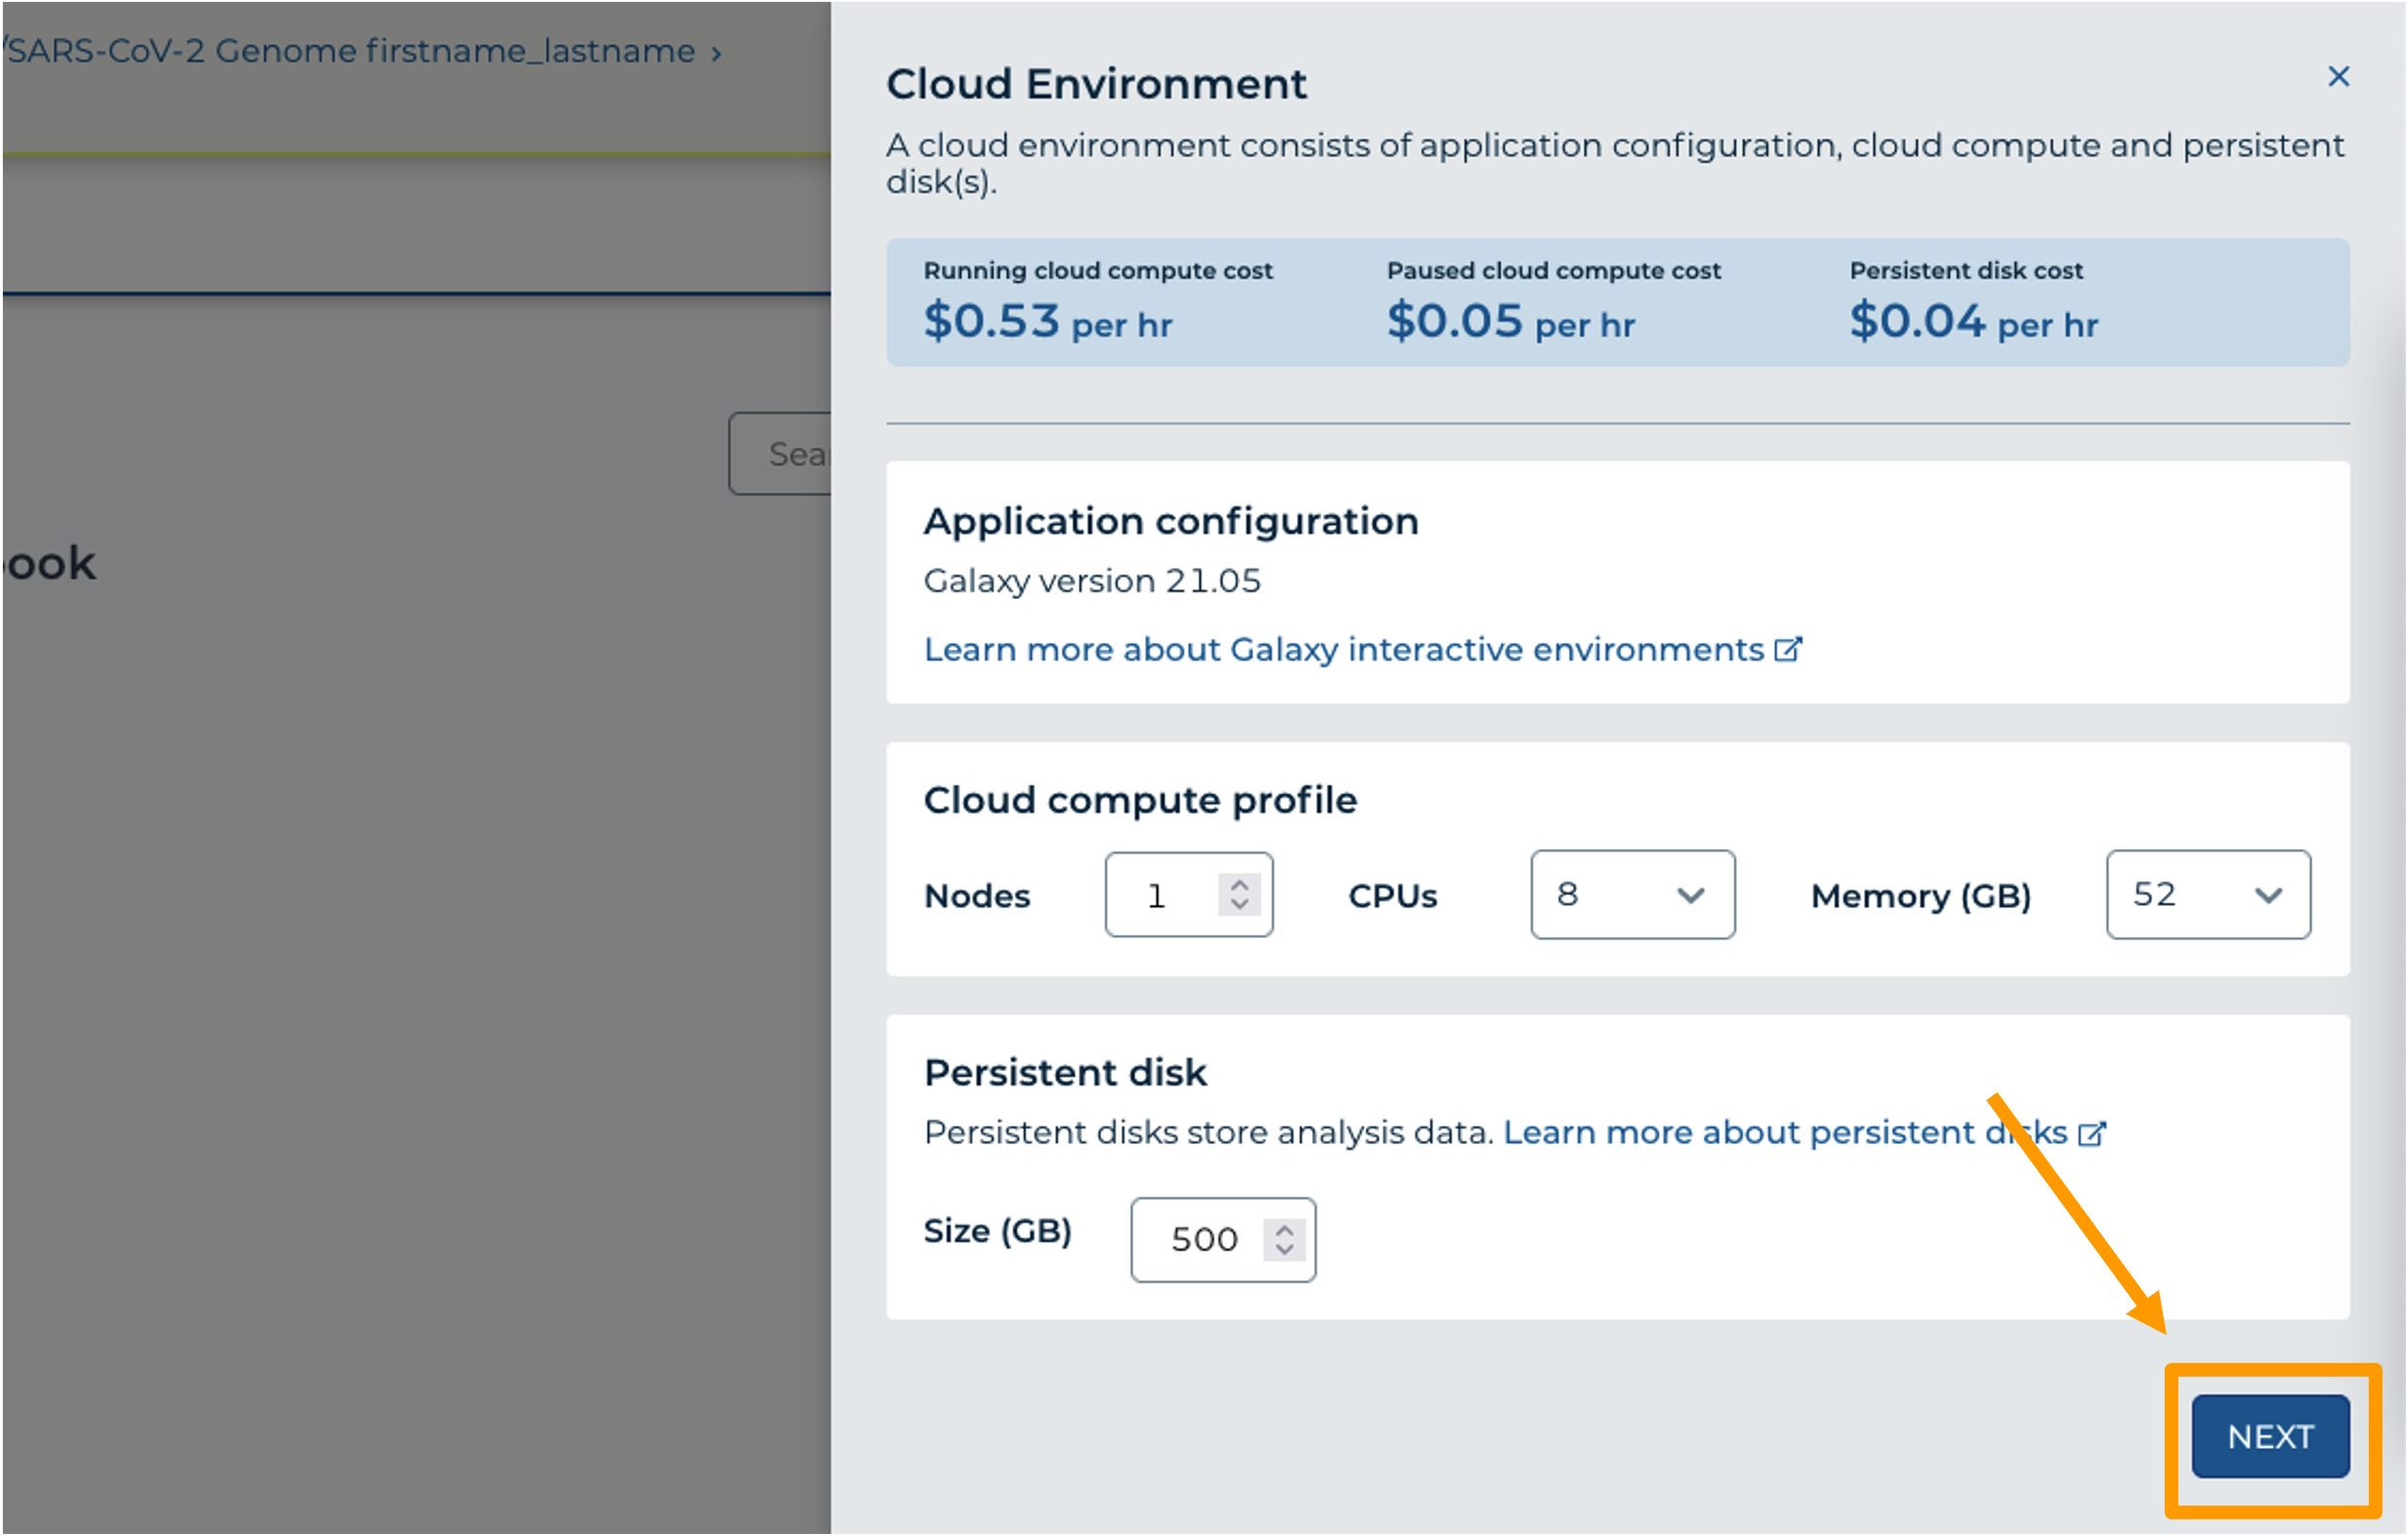 The NEXT button among cloud environments has been highlighted.